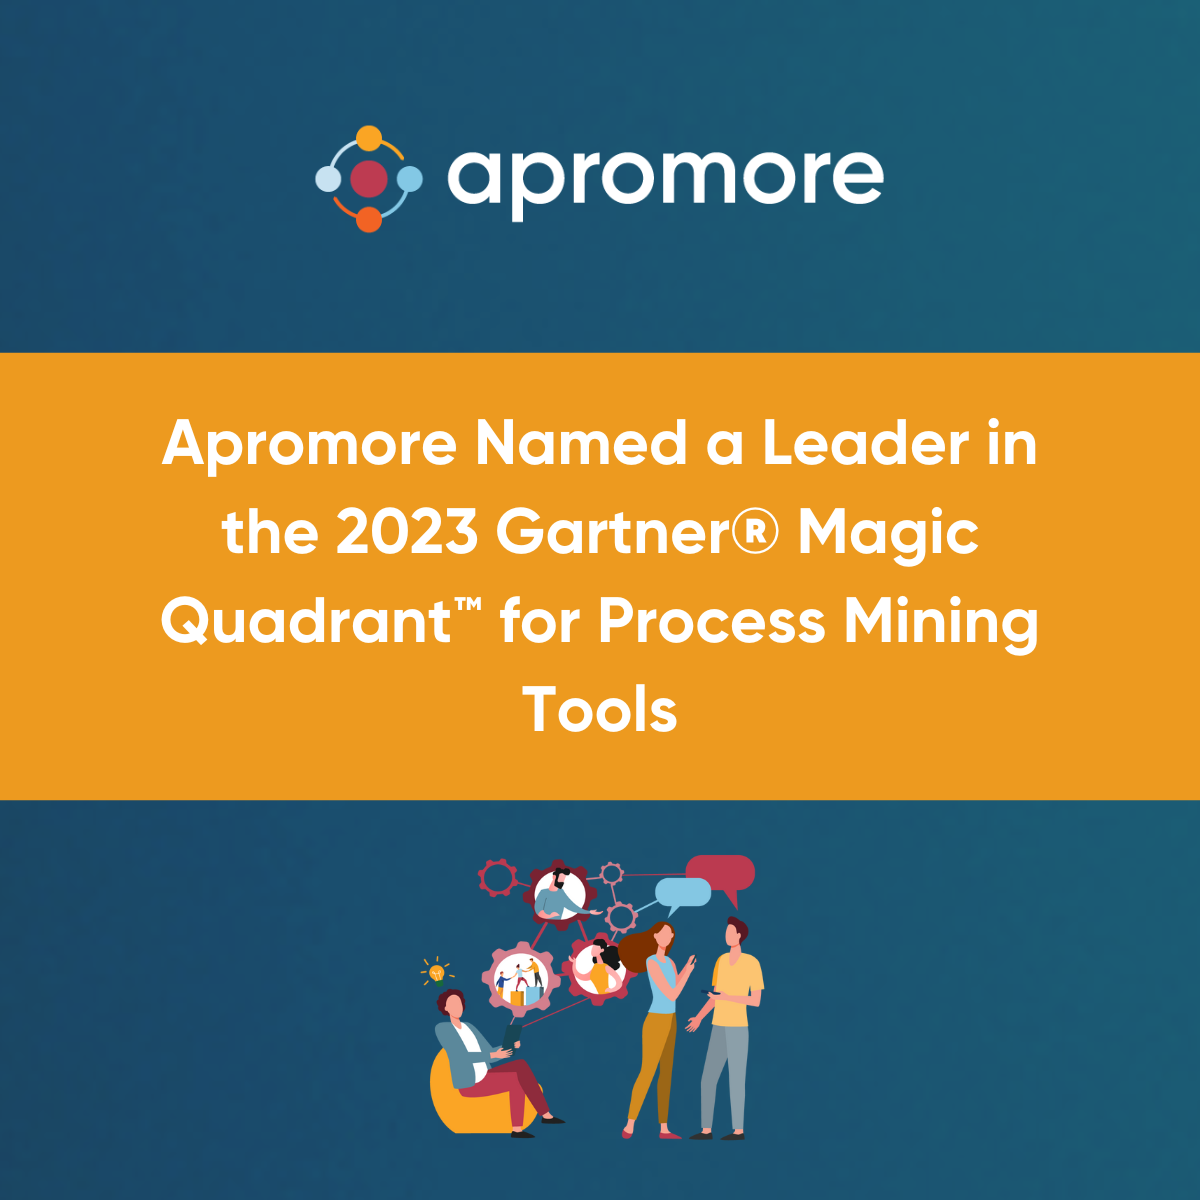 Apromore positioned as a Leader in 2023 Gartner® Magic Quadrant™ for Process Mining Tools